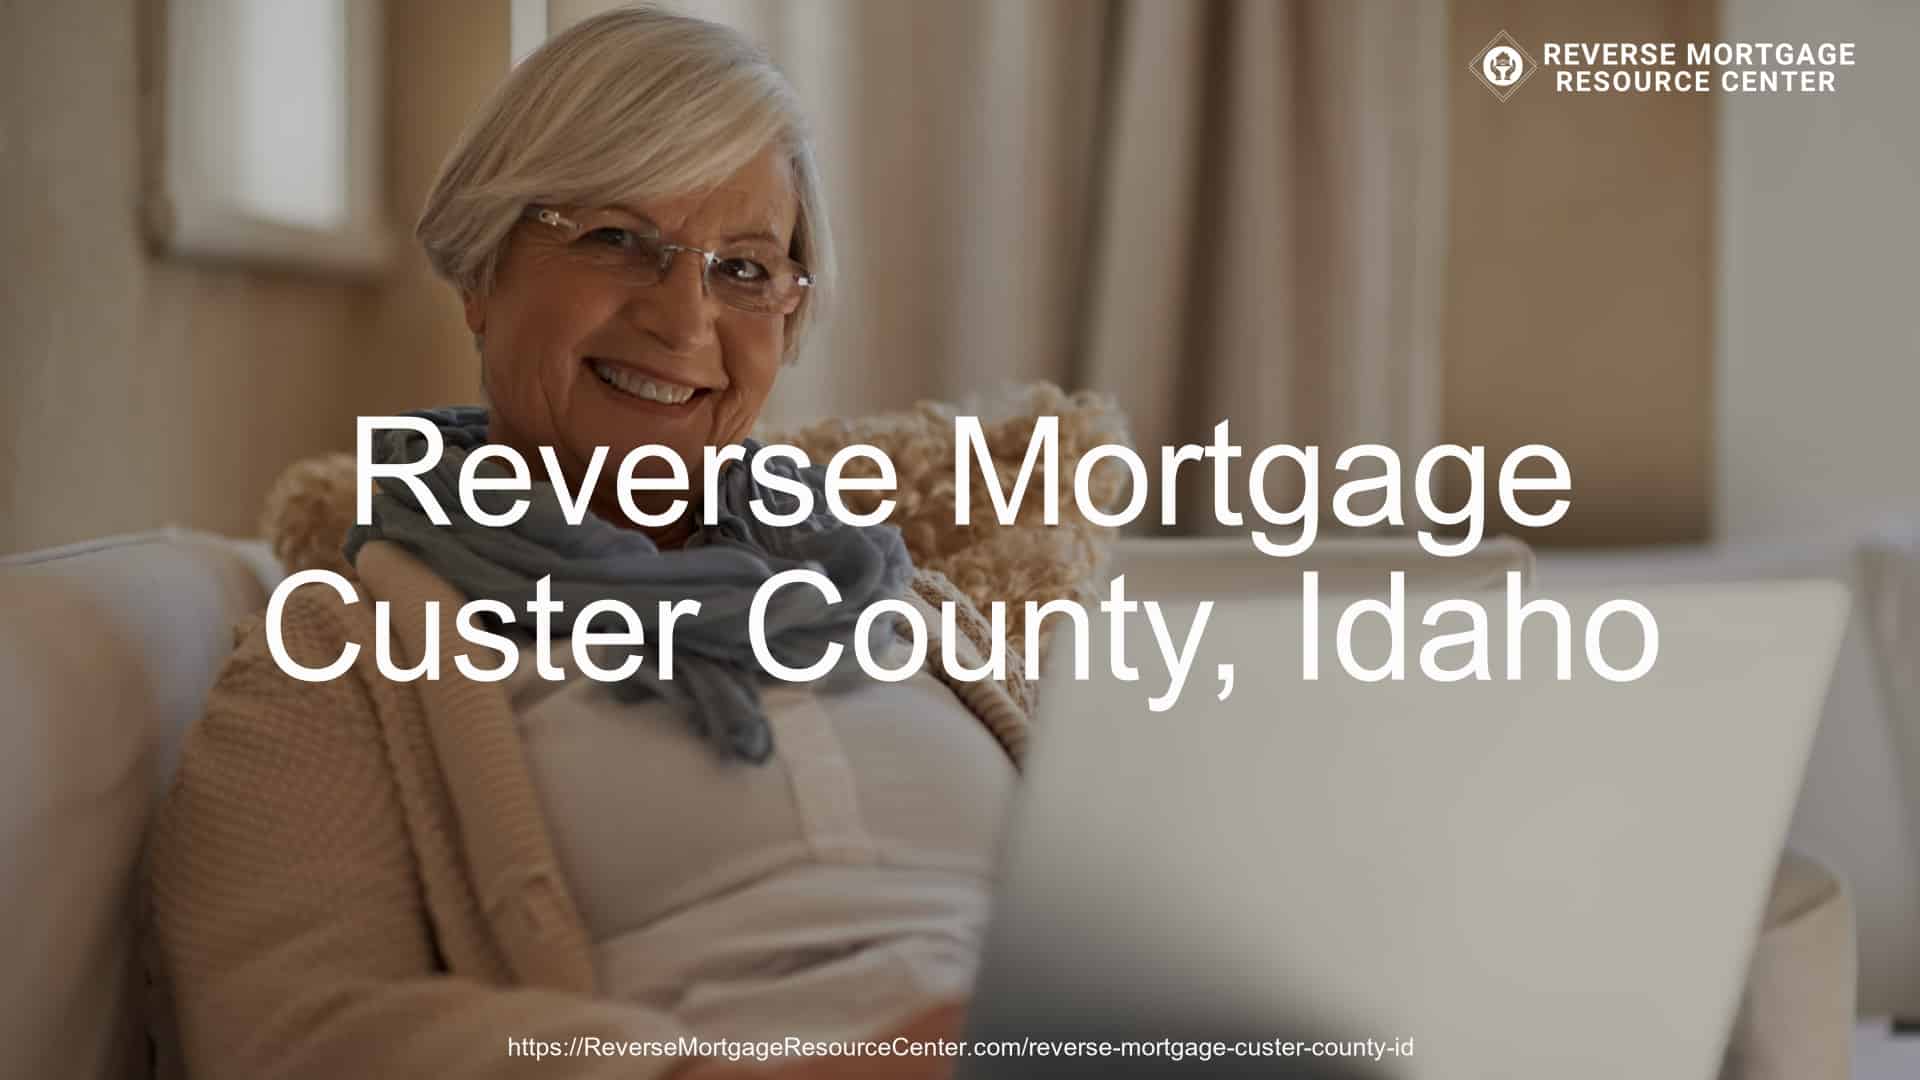 Reverse Mortgage Loans in Custer County Idaho